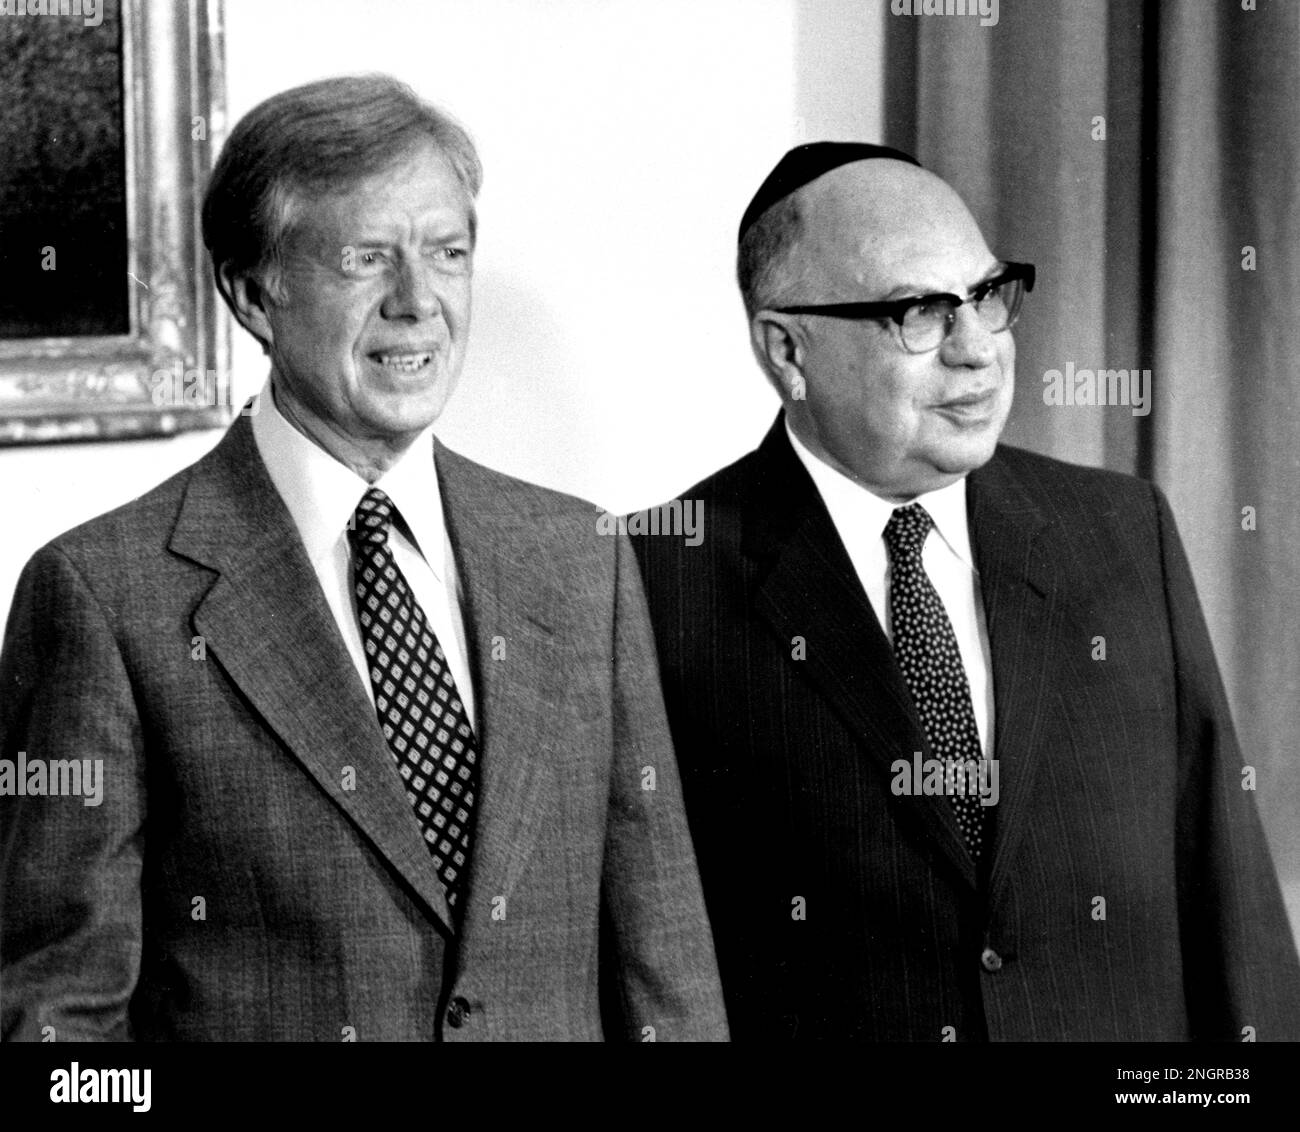 United States President Jimmy Carter, left, and Minister of Internal Affairs Shlomo Yosef Burg of Israel, right, as they meet with Foreign Minister Kamal Hassan Ali of Egypt in the Oval Office of the White House in Washington, DC on July 3, 1980. Credit: Benjamin E. 'Gene' Forte/CNP Stock Photo